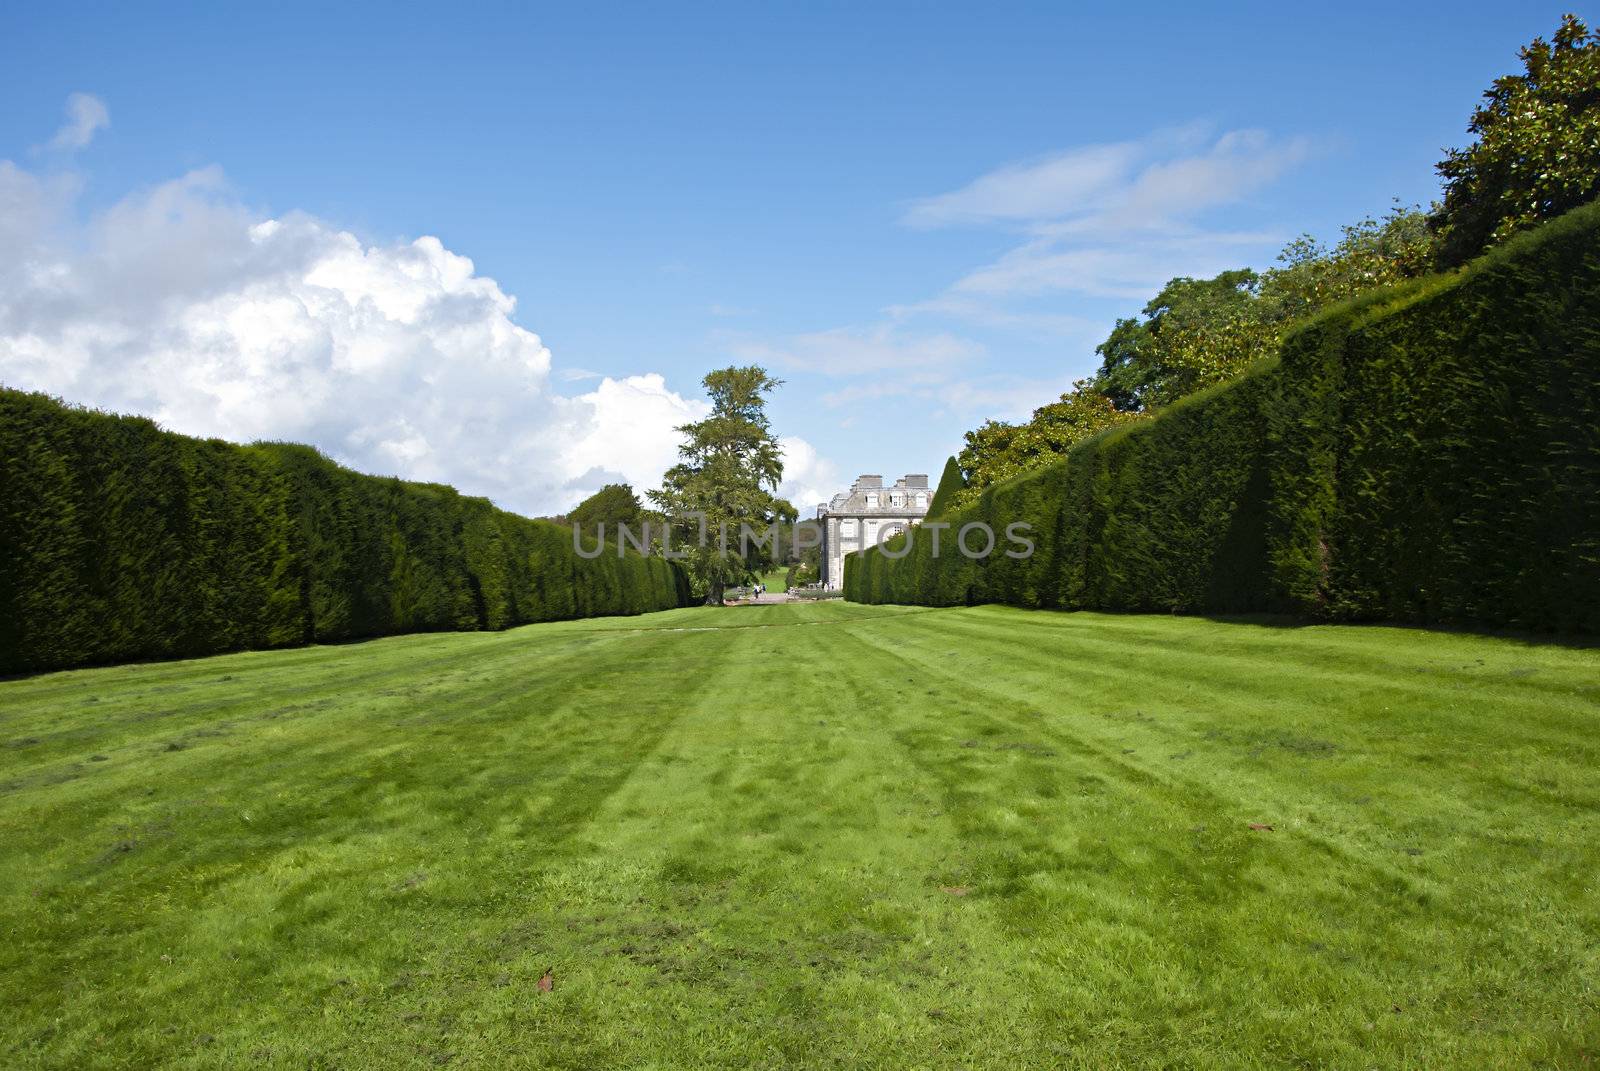 A Lawn and Hedges in a English Country Garden